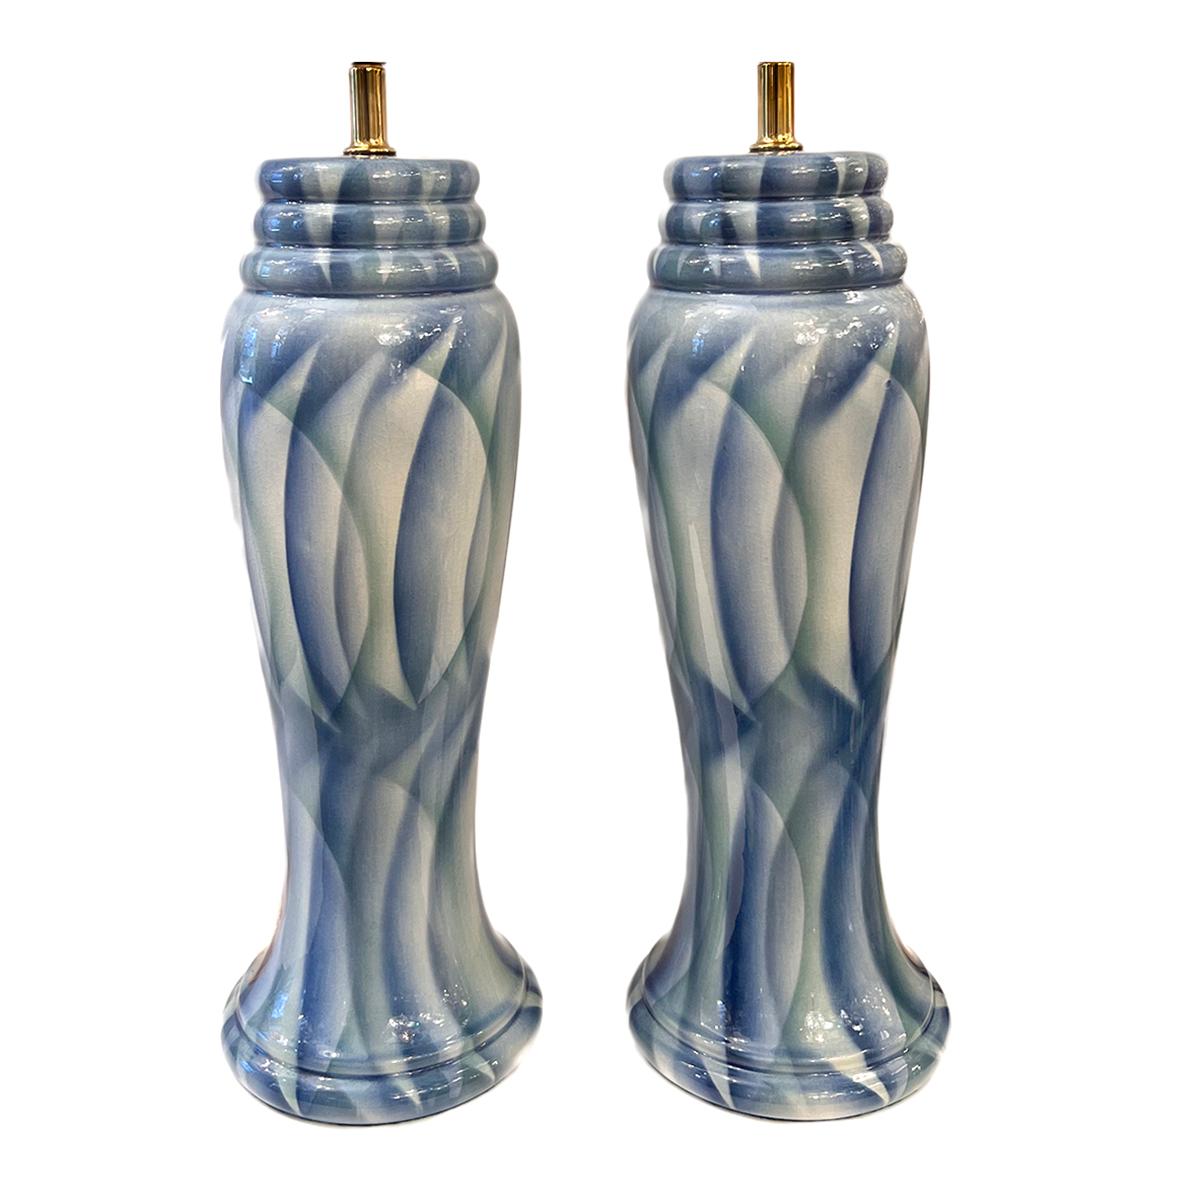 Pair of circa 1980s French blue porcelain lamps with waves pattern.

Measurements:
Height of body: 23.75